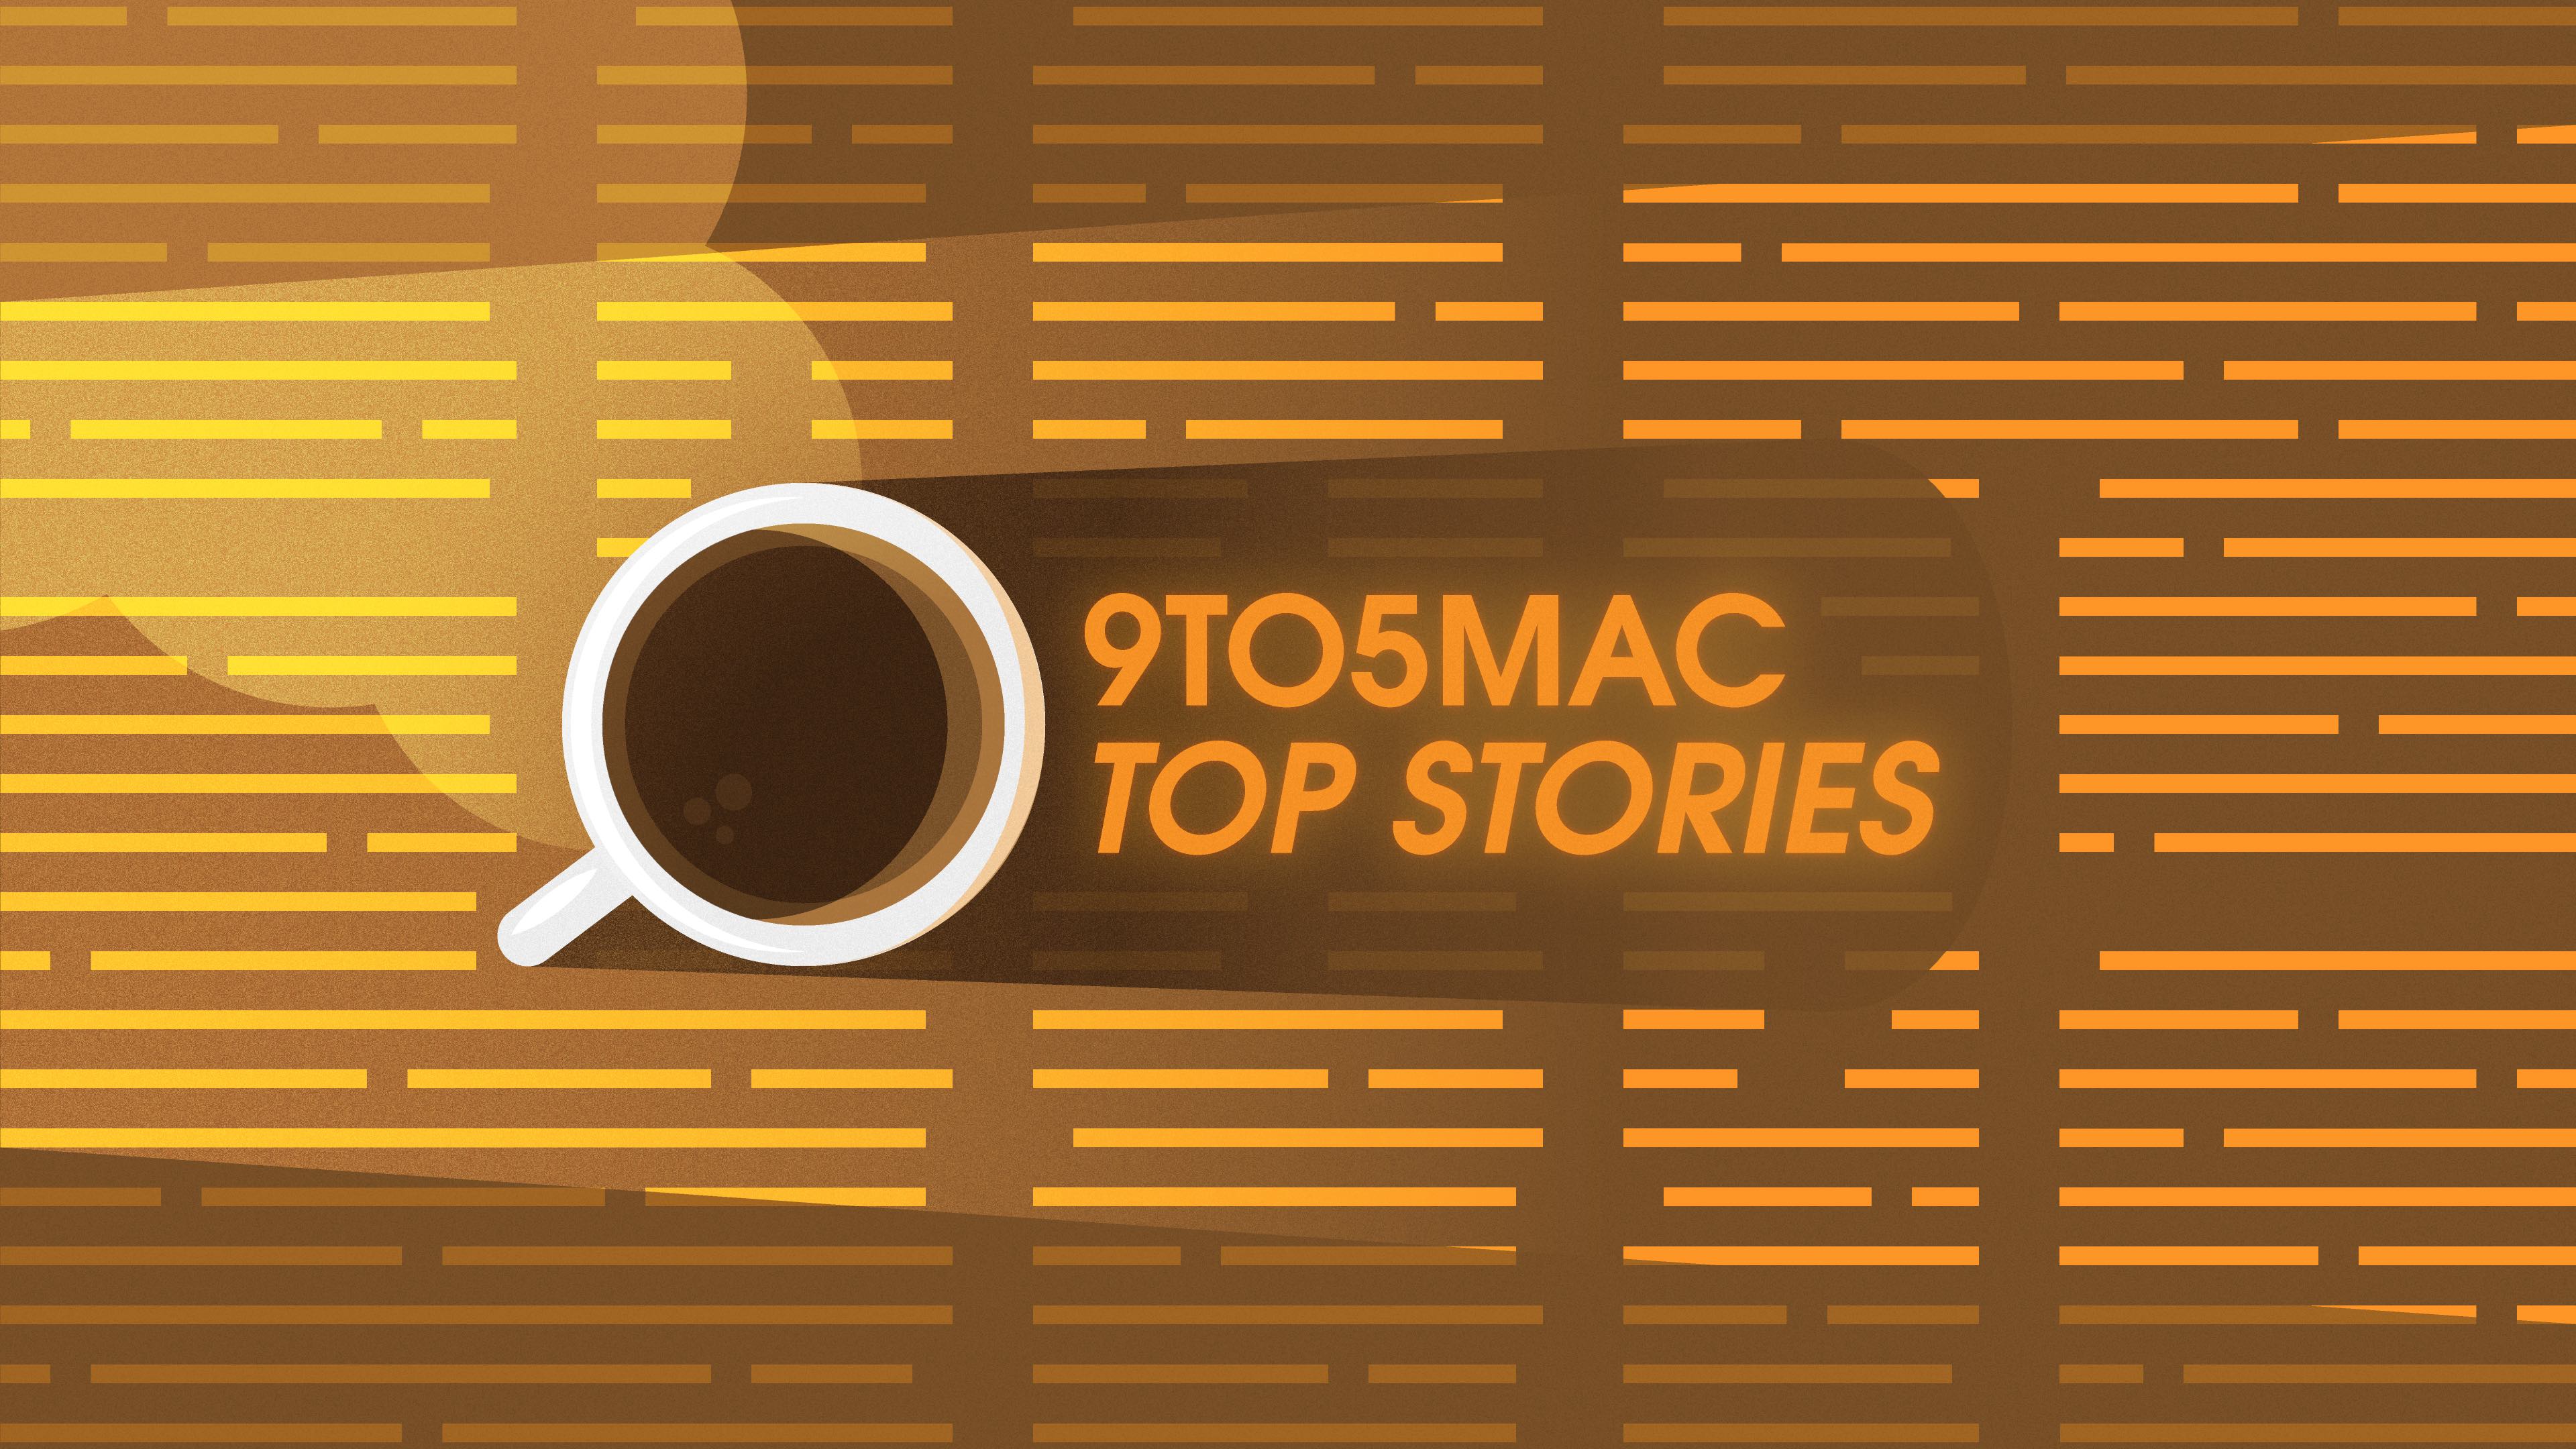 This week’s top stories: iOS 14 beta testing, Apple Pay QR code support, iPhone 12 rumors, more - 9to5Mac